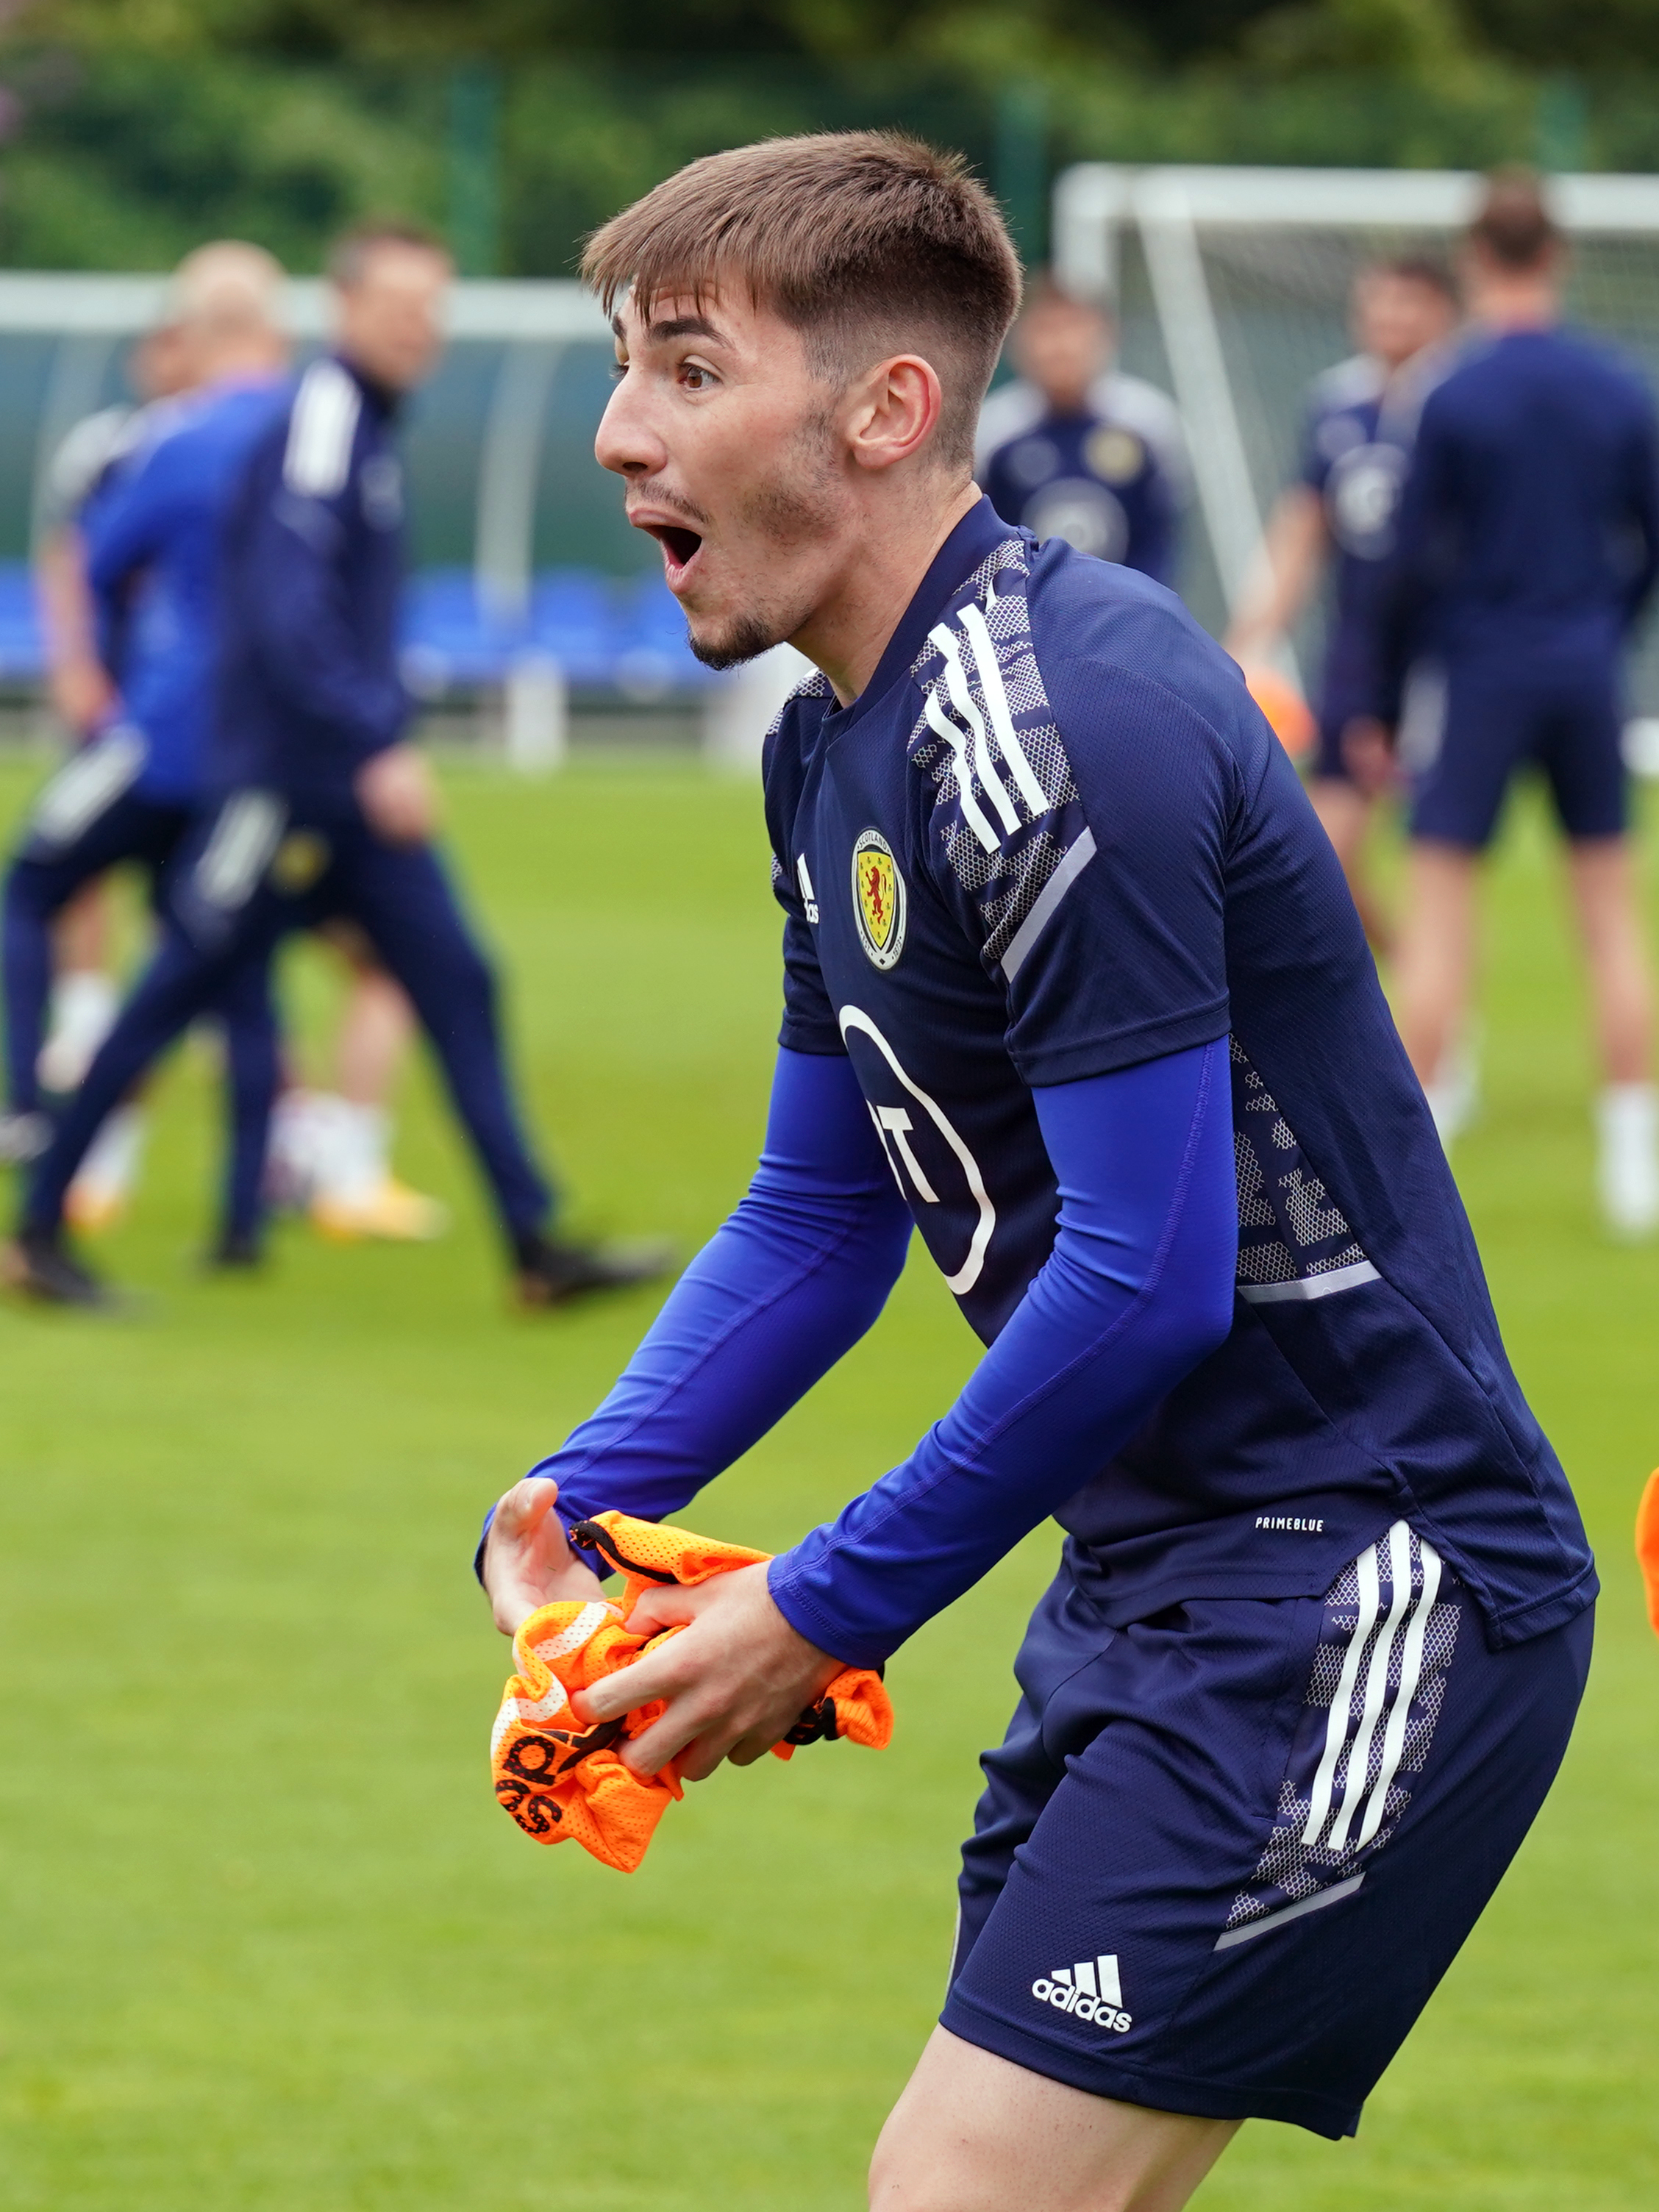 He'll be a joy! Gary Chivers on Brighton new boy Billy Gilmour